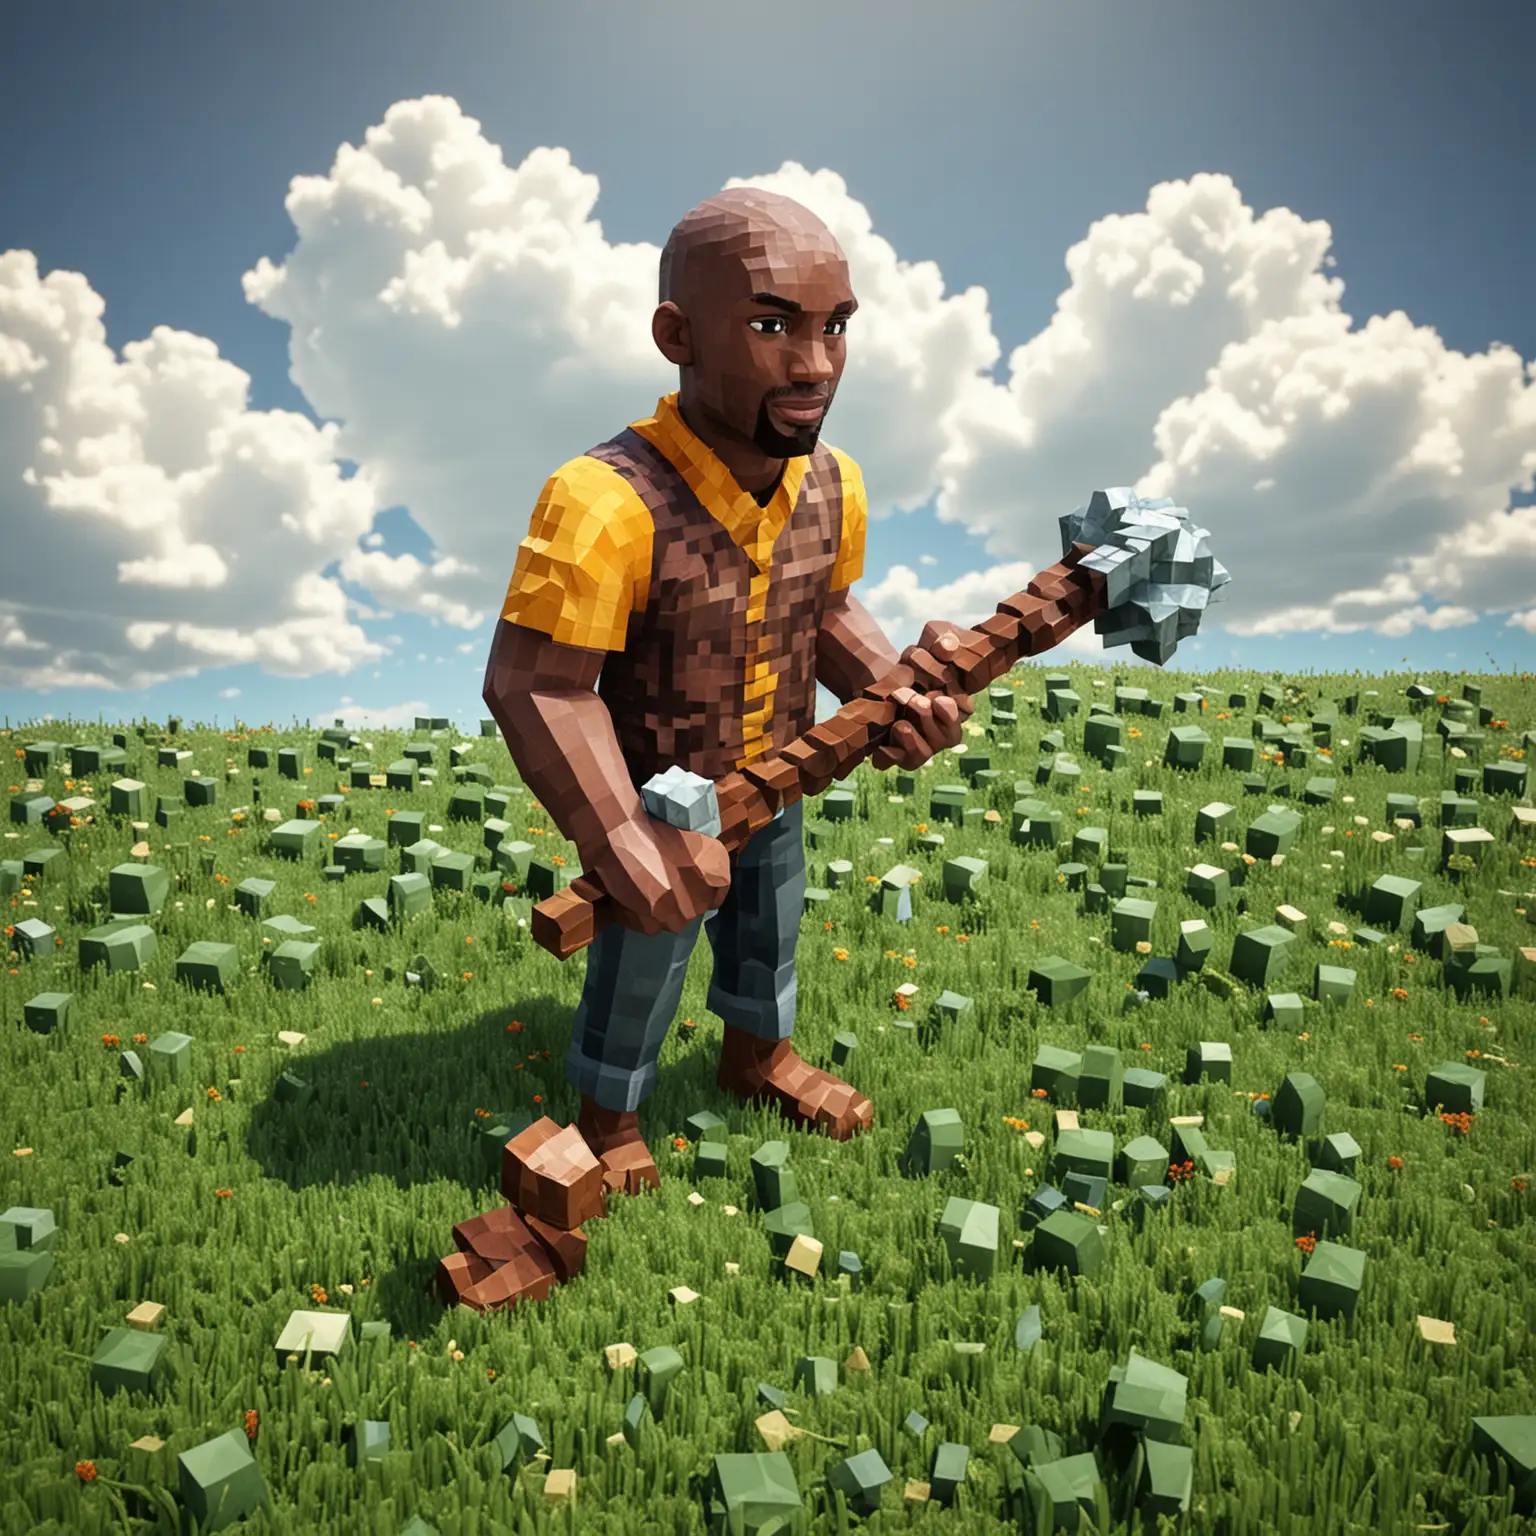 Kobe in my world game, holding a diamond pickaxe digging grass blocks, clouds made of pixel blocks form 'Mamba Out'